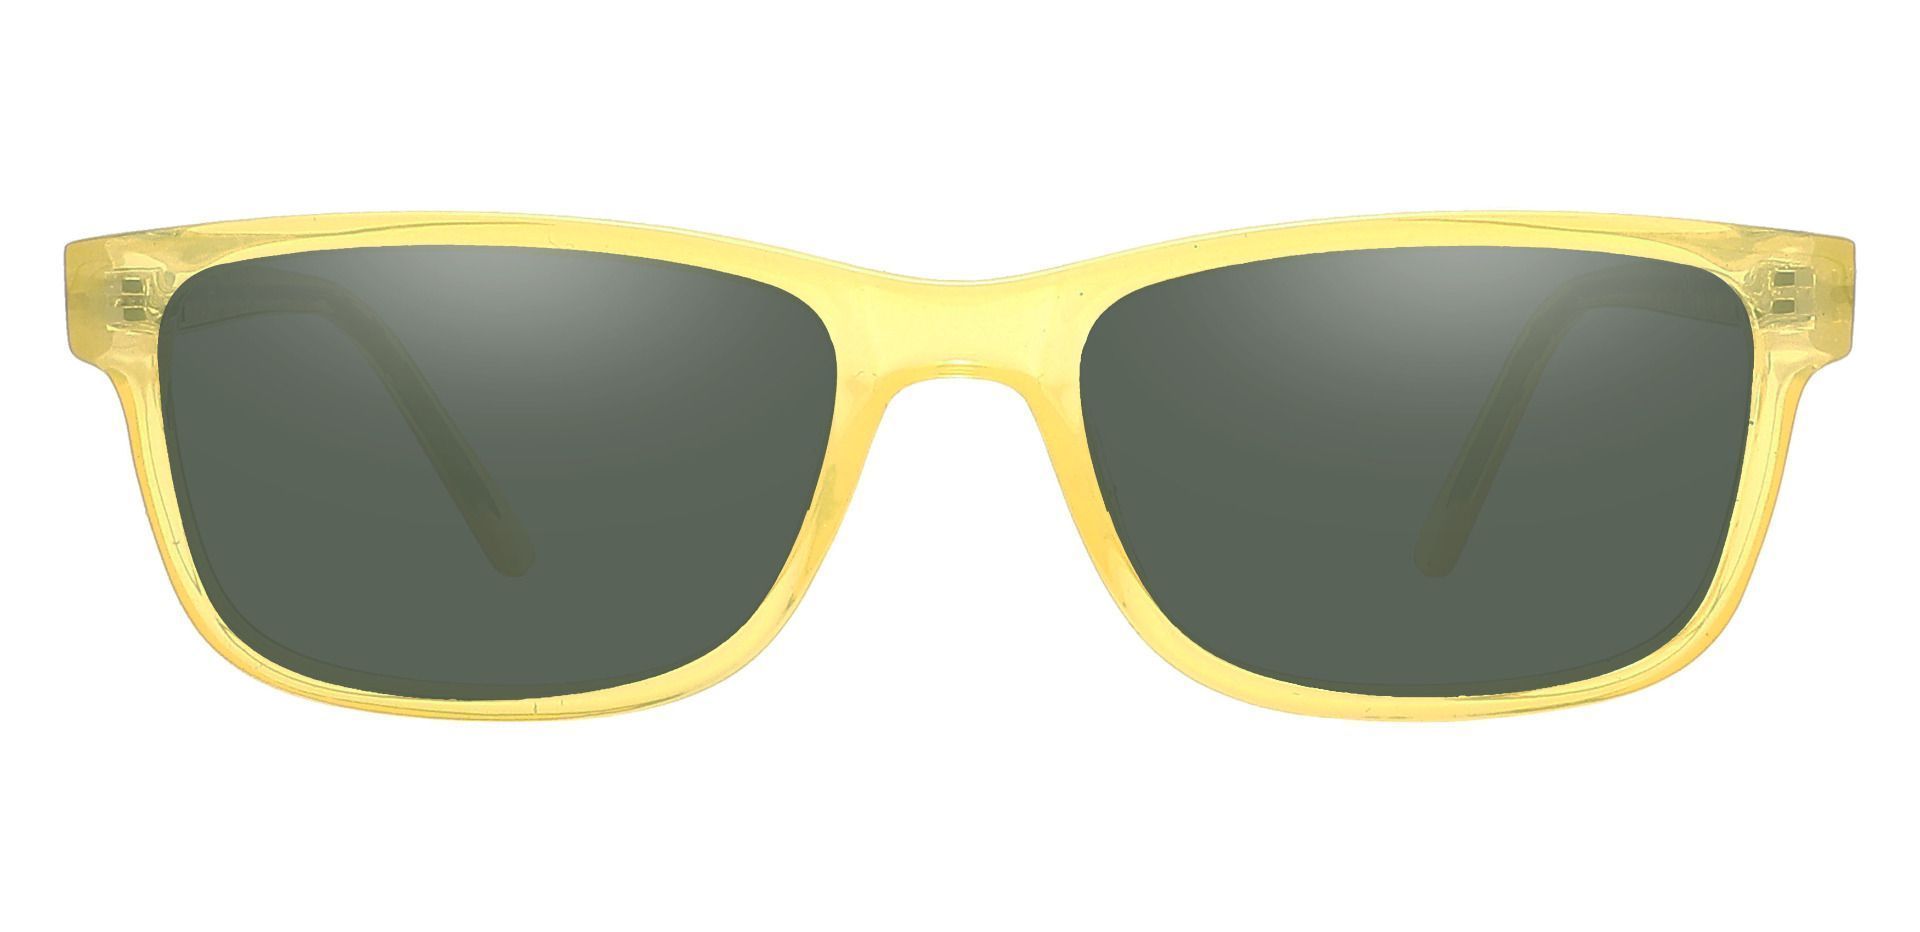 Cory Rectangle Non-Rx Sunglasses - Yellow Frame With Green Lenses